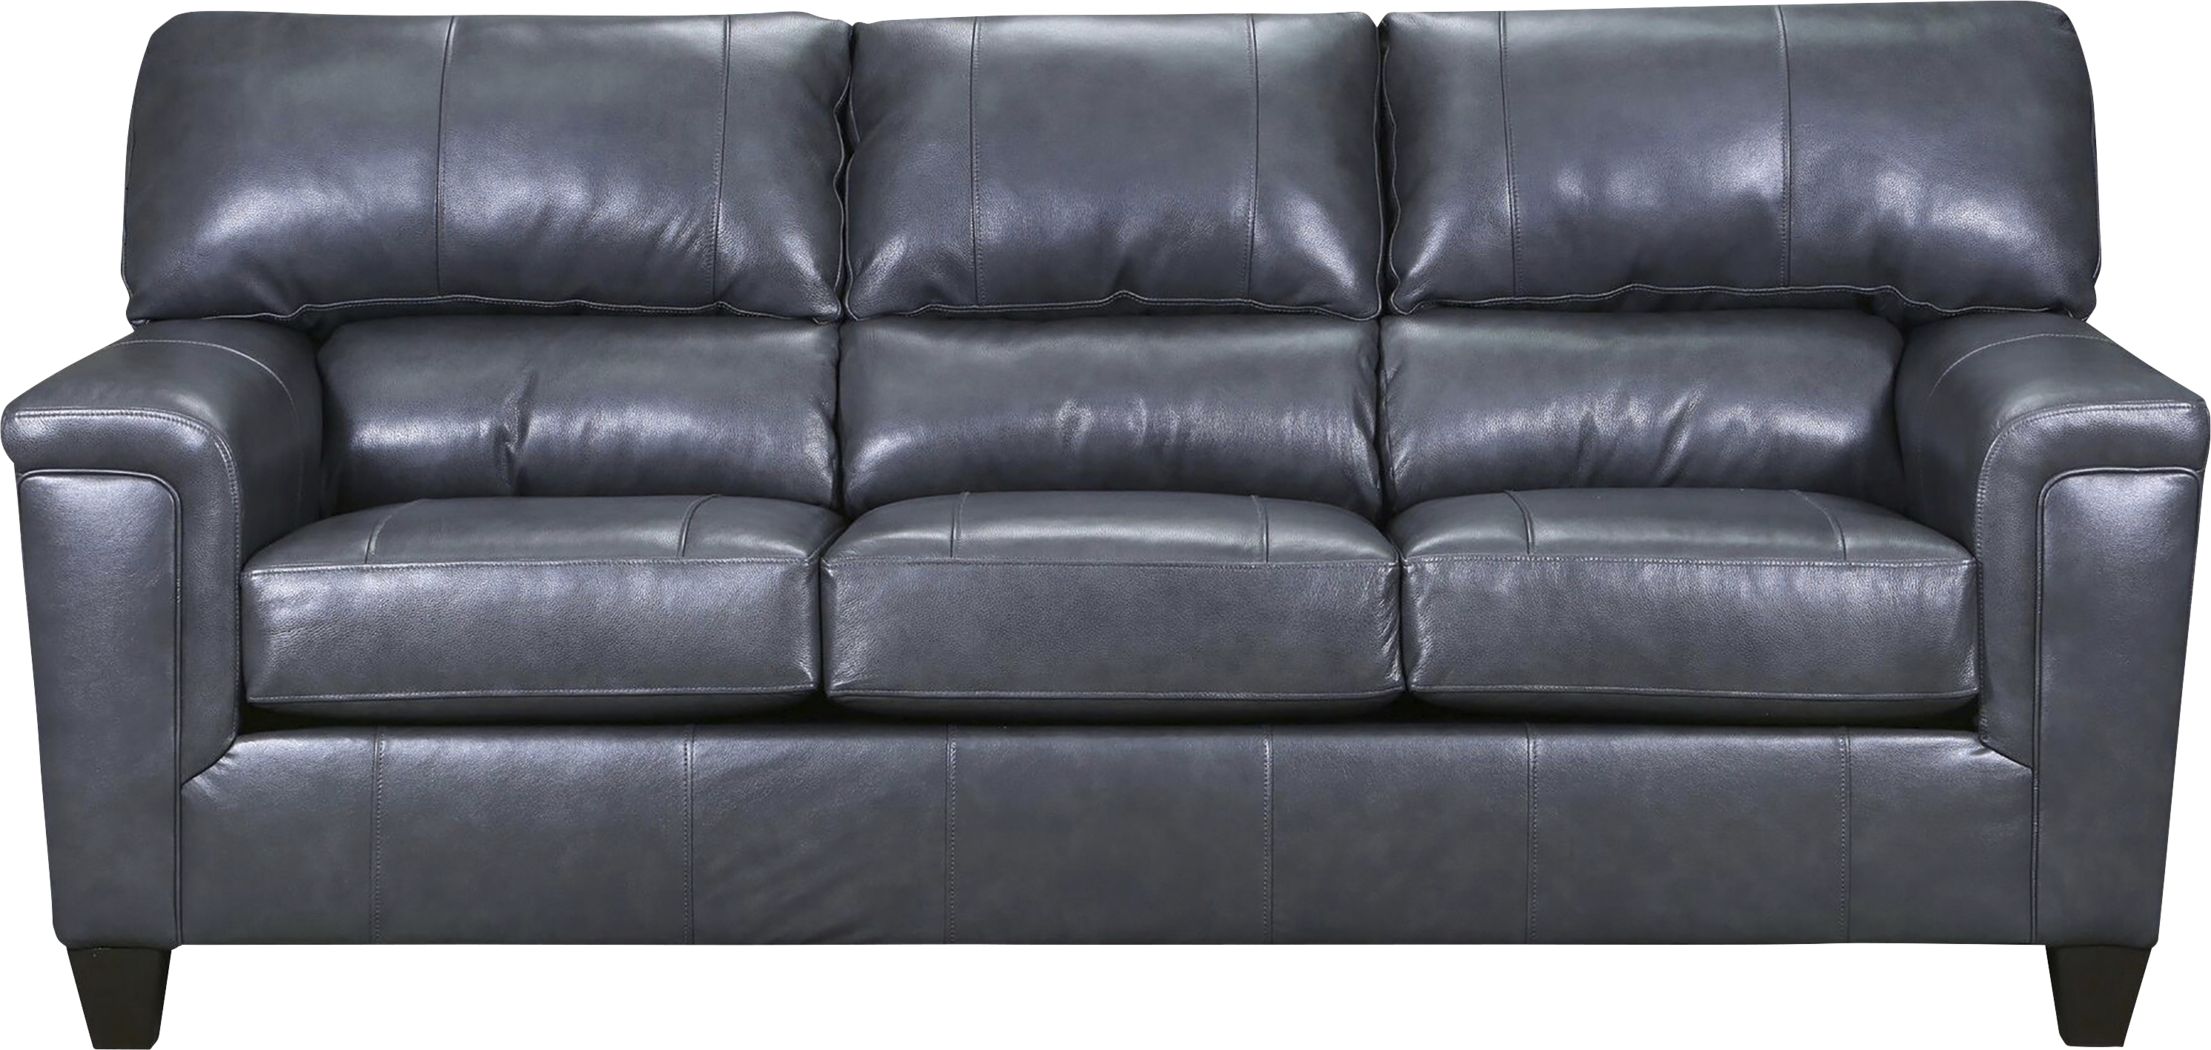 Leather Living Room Furniture, Affordable Leather Couches